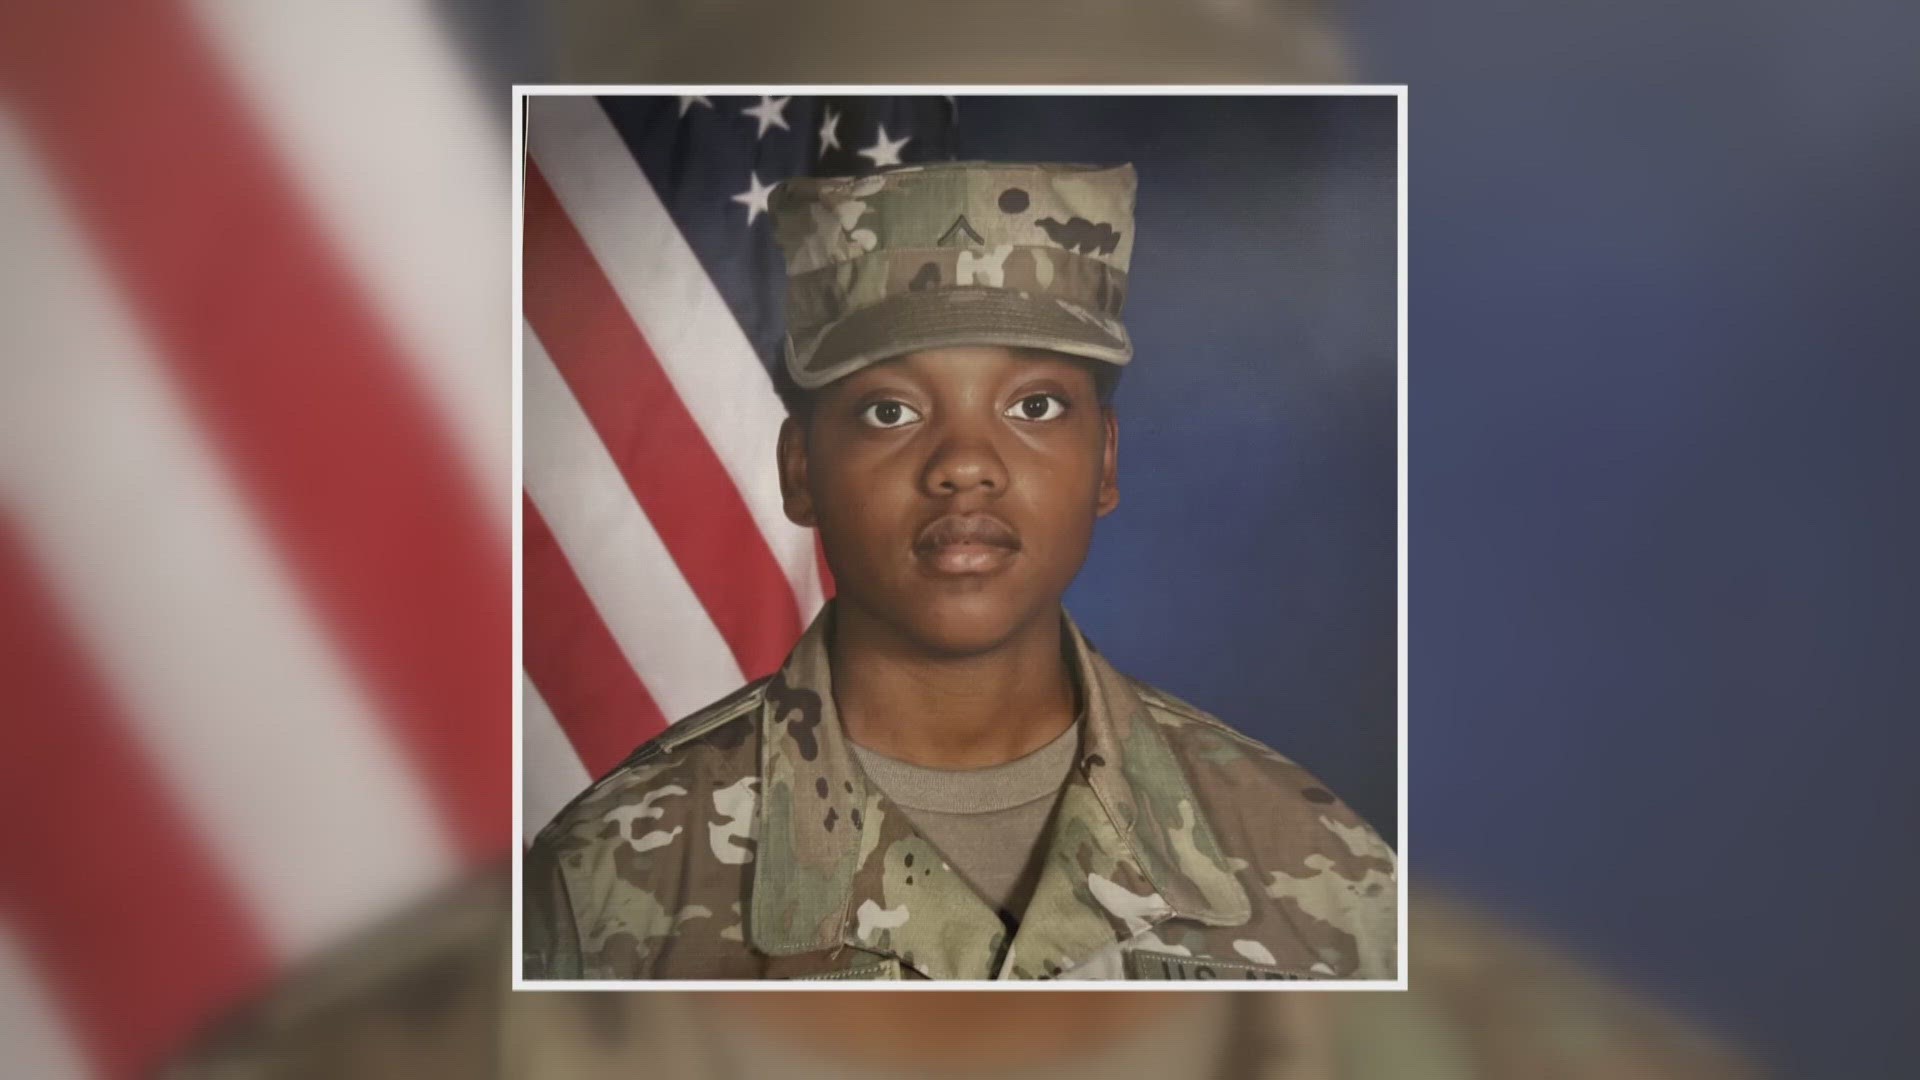 Army Sgt. Kennedy Sanders was killed in a drone strike in Jordan while serving her country. Her viewing and memorial service will be open to the public.